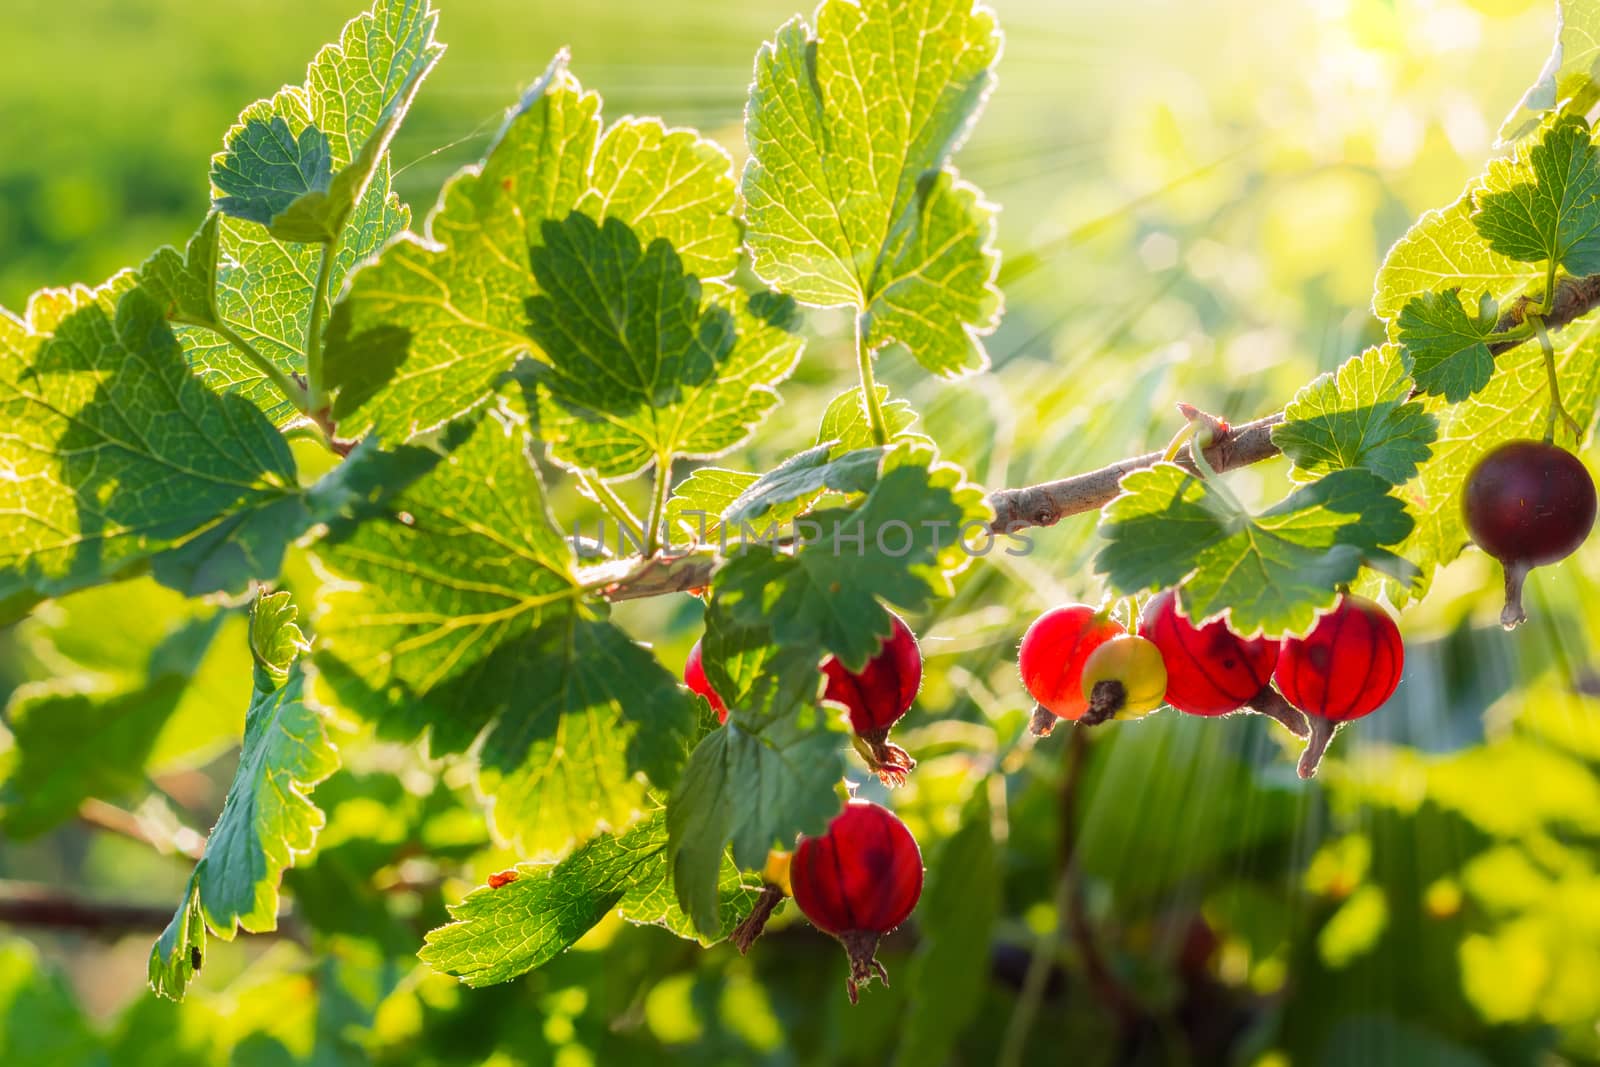 Branch of jostaberry with ripening berries and leaves in the rays of the setting sun
